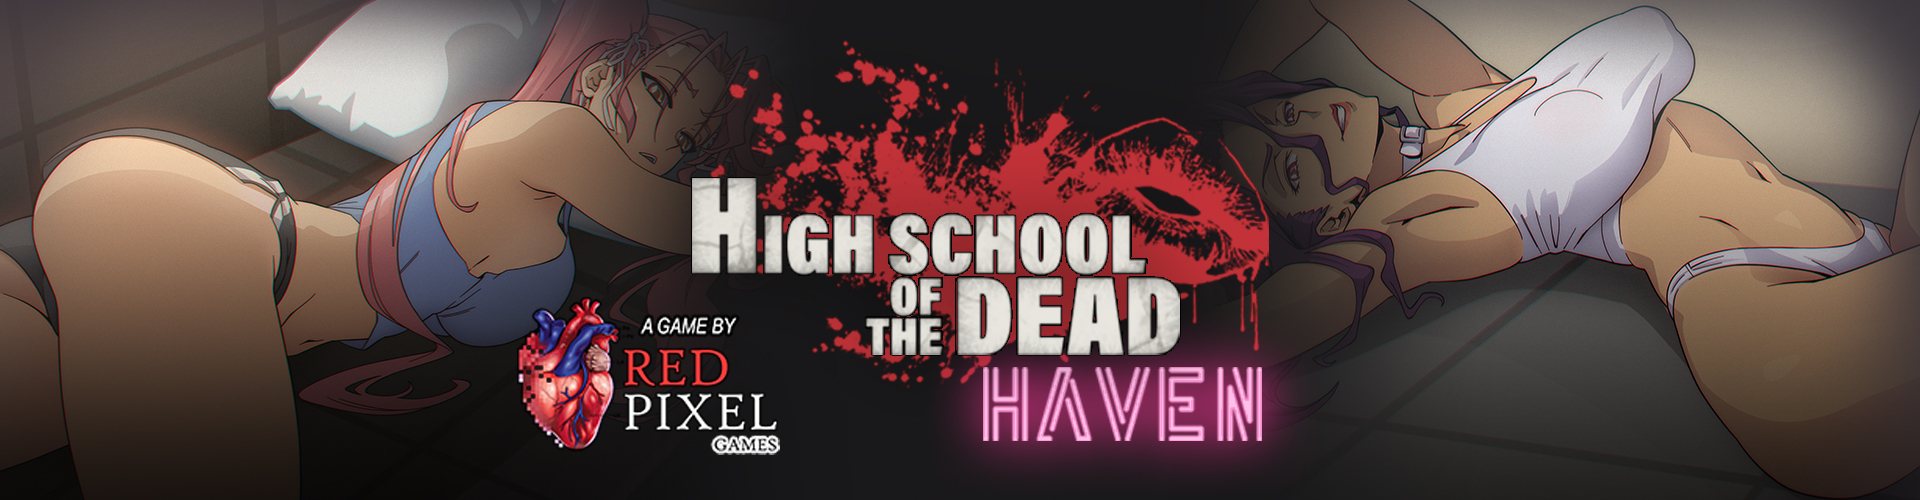 Highschool of the Dead Haven [Red Pixel] Adult xxx Game Download